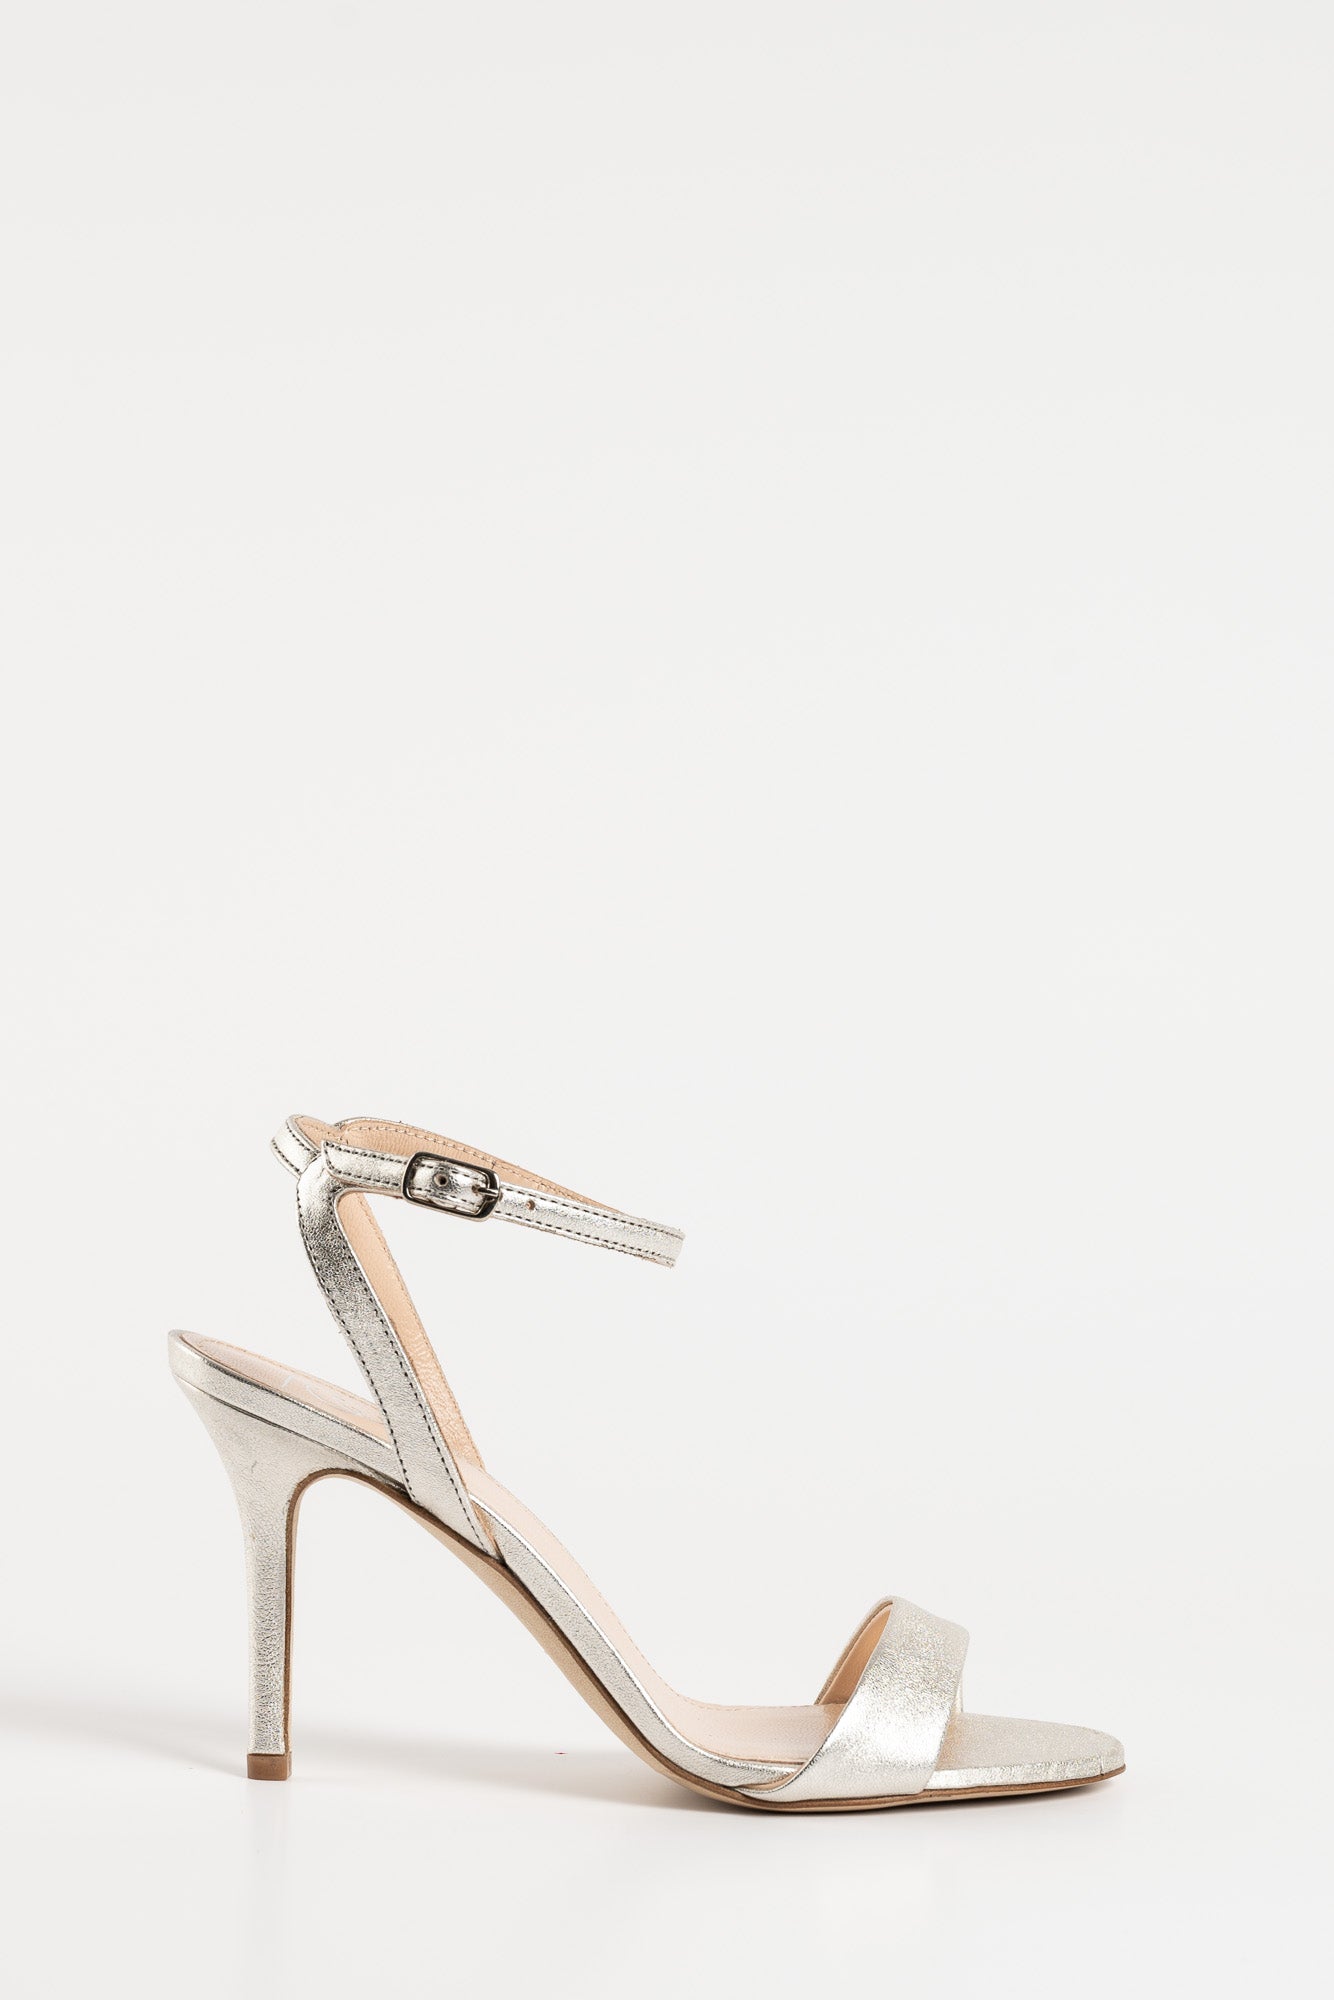 Sandal Bianca 127 | Silver Leather